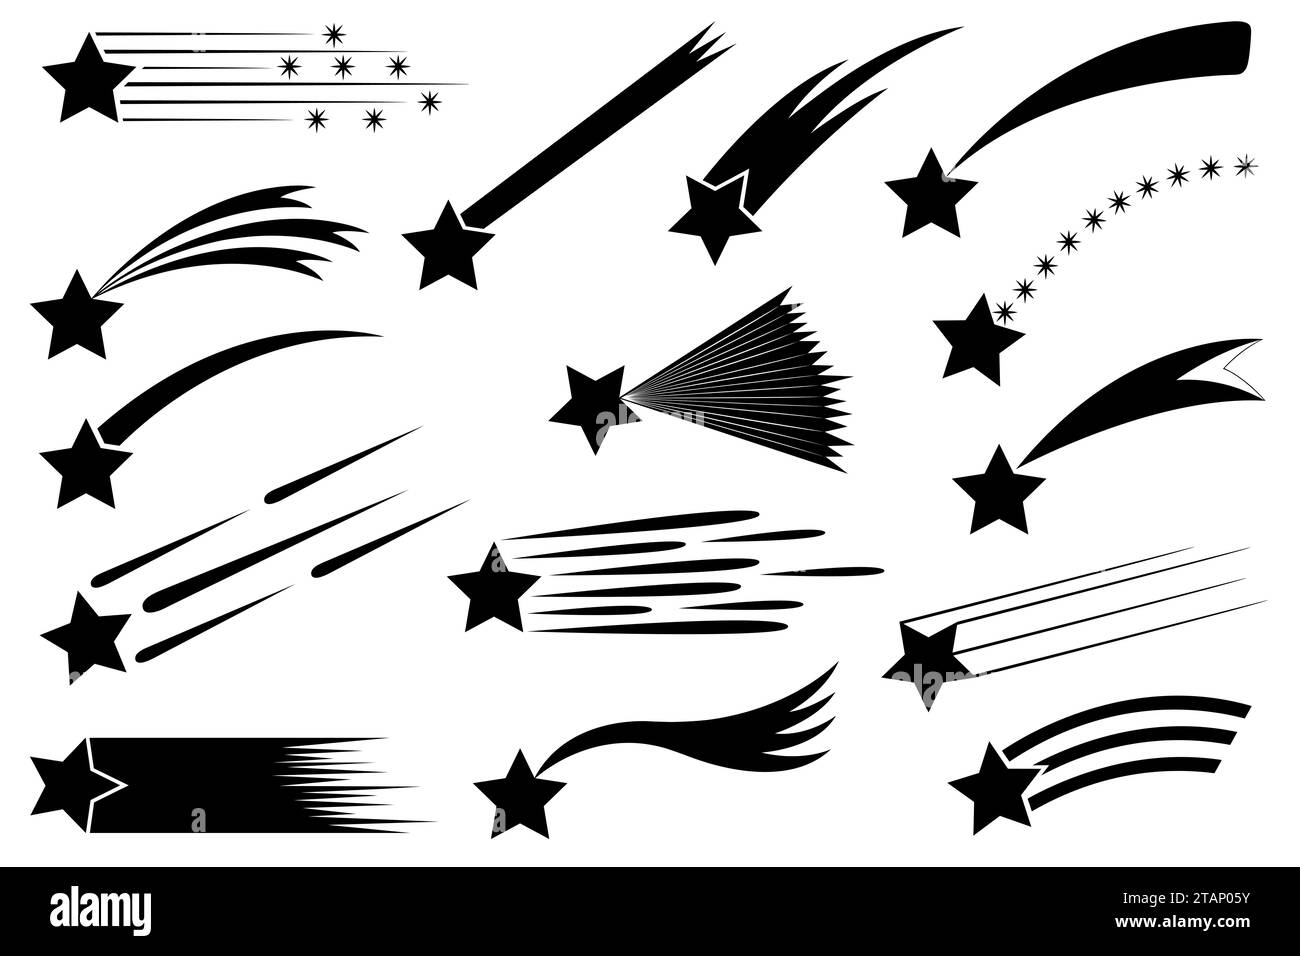 Shooting star silhouettes isolated on white background Stock Photo